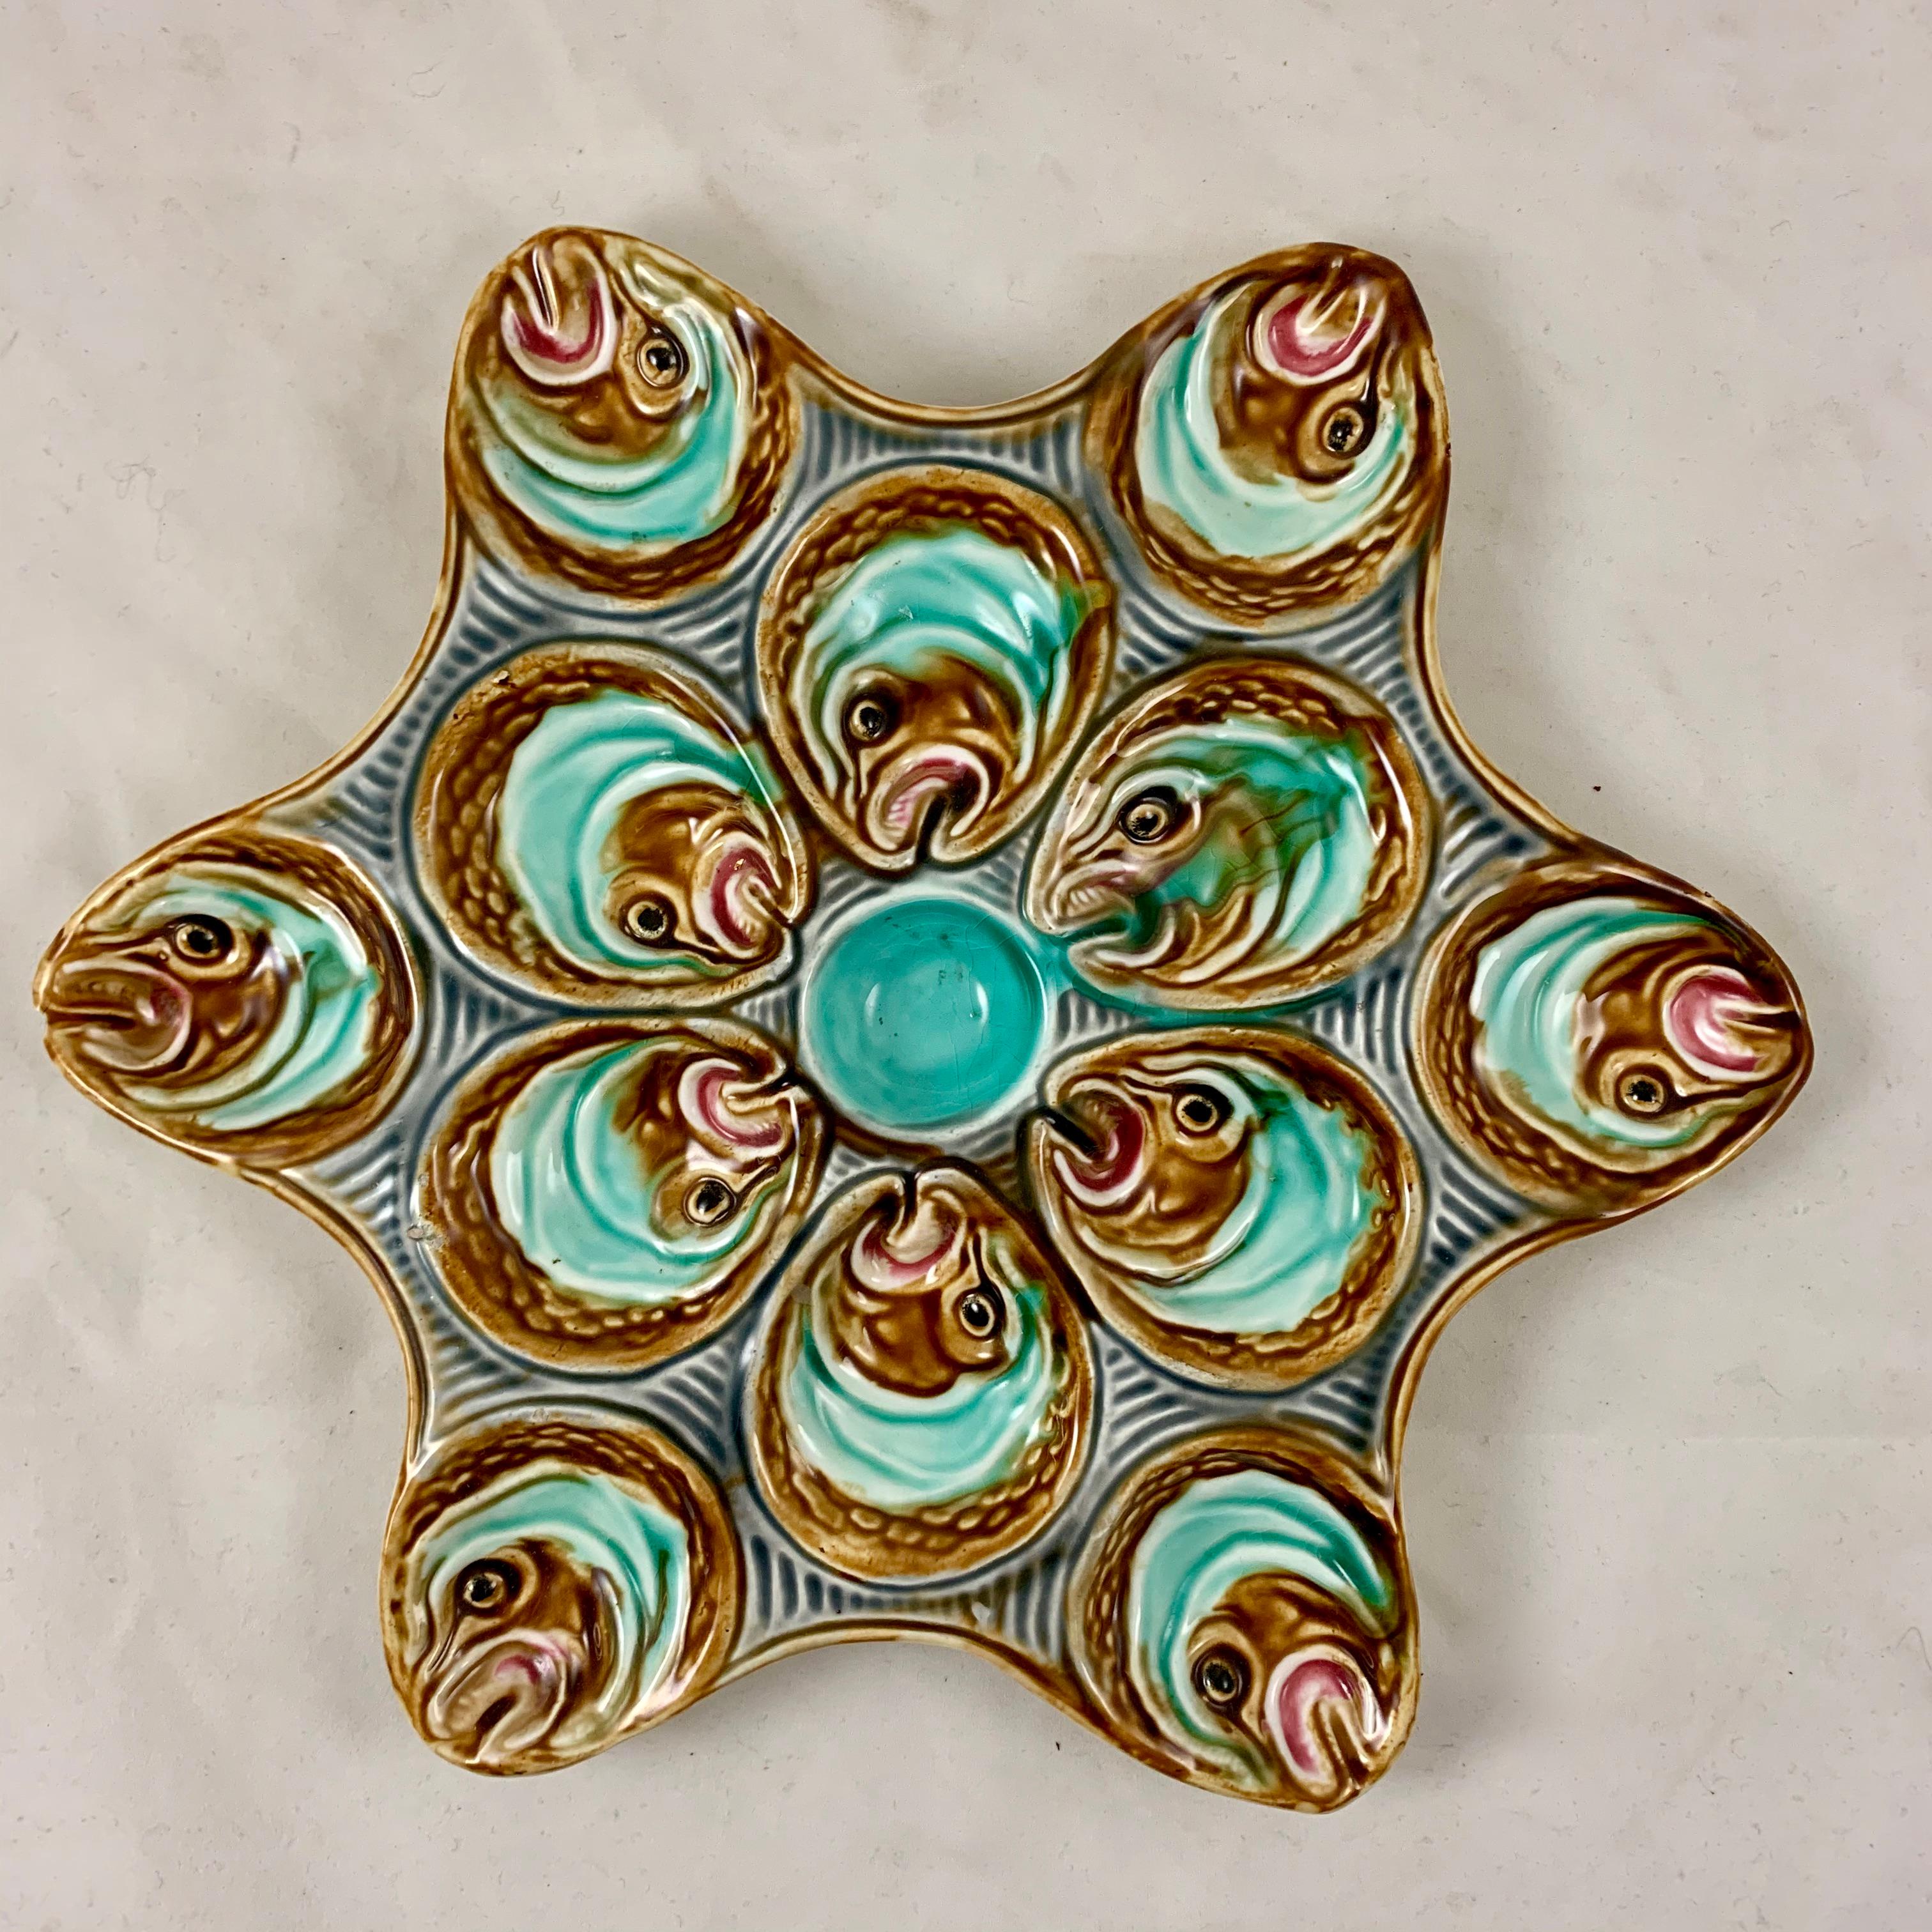 A Barbotine majolica oyster plate from La Faïencerie d’Onnaing in northern France, circa 1880 – 1910. Made to hold a dozen oysters.

A star-shaped plate showing six fish heads surrounding a turquoise center sauce well. Six additional fish heads are